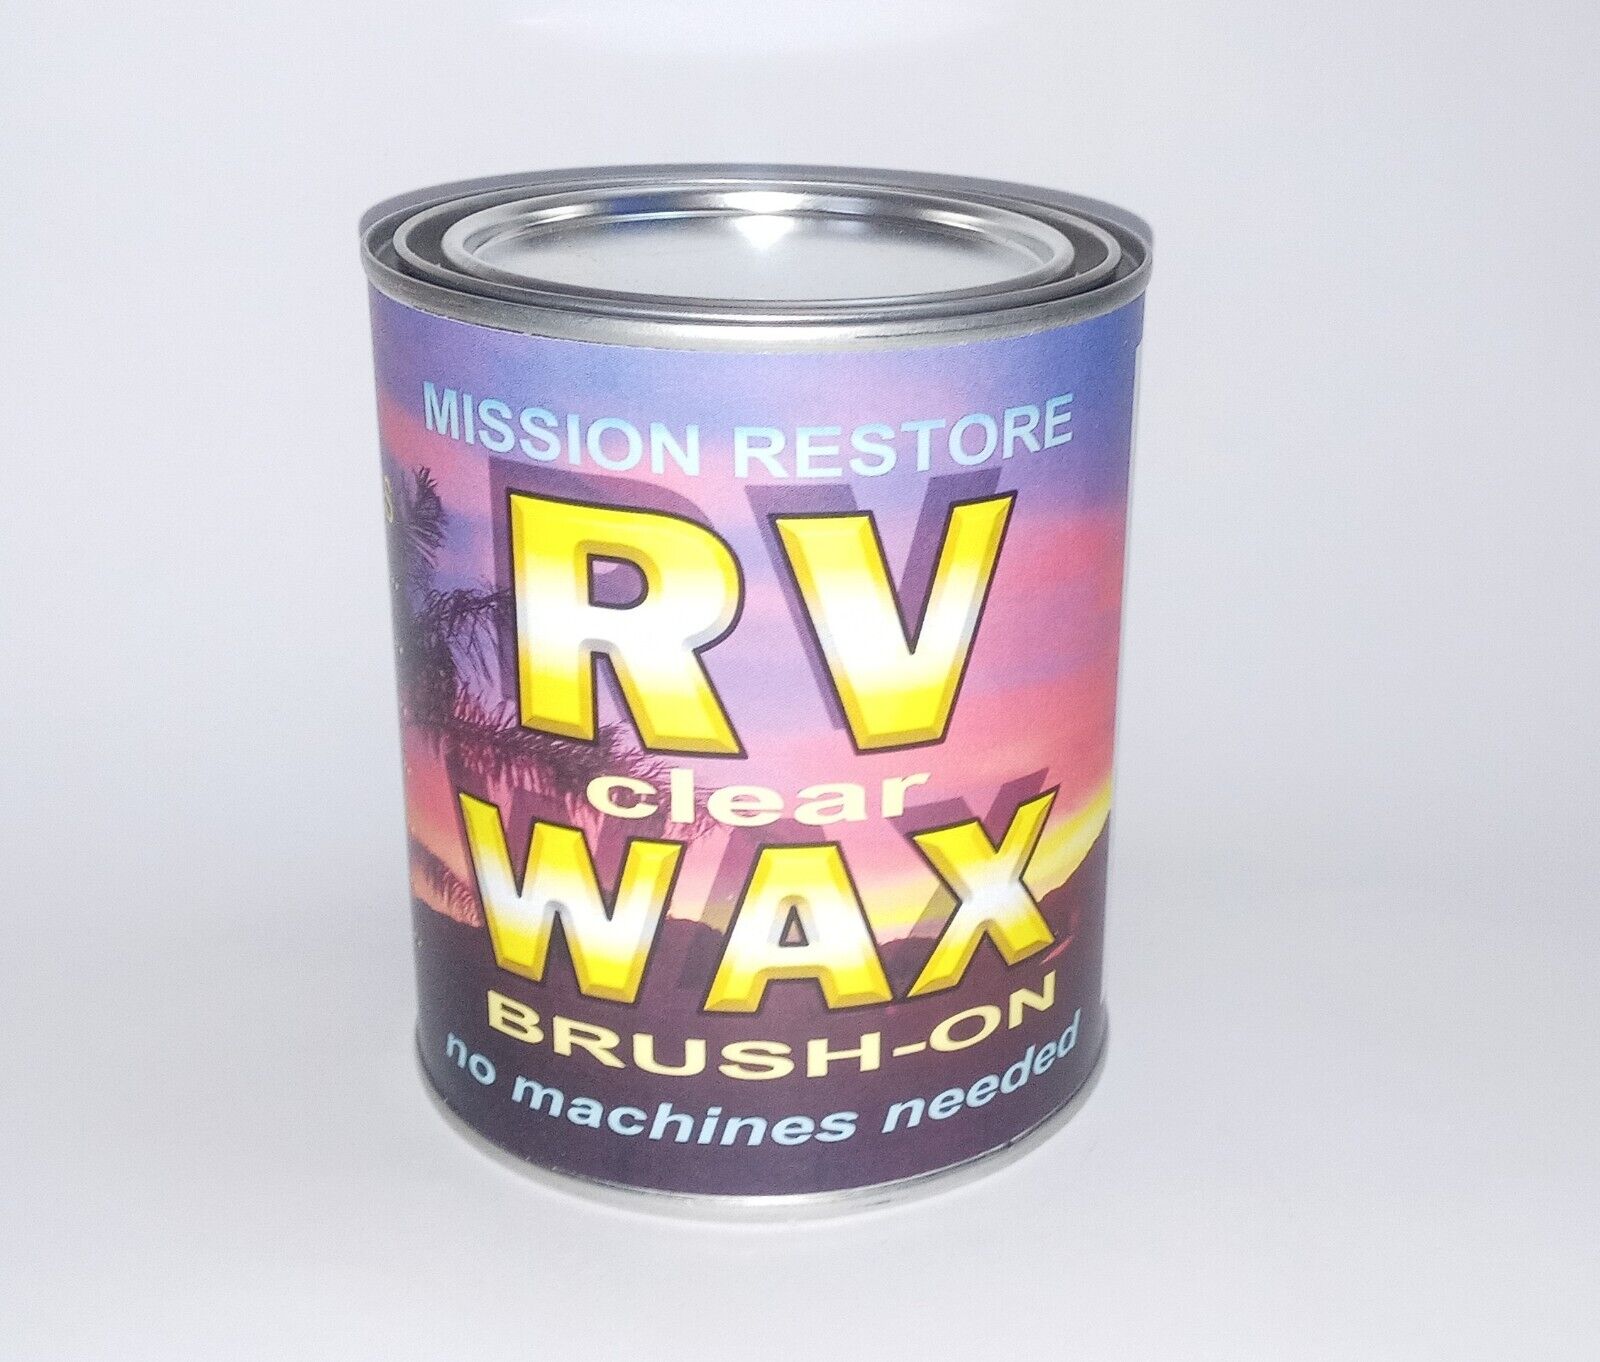 Rv Wax brush on, self-levelling no machines used, removes loose oxidation.